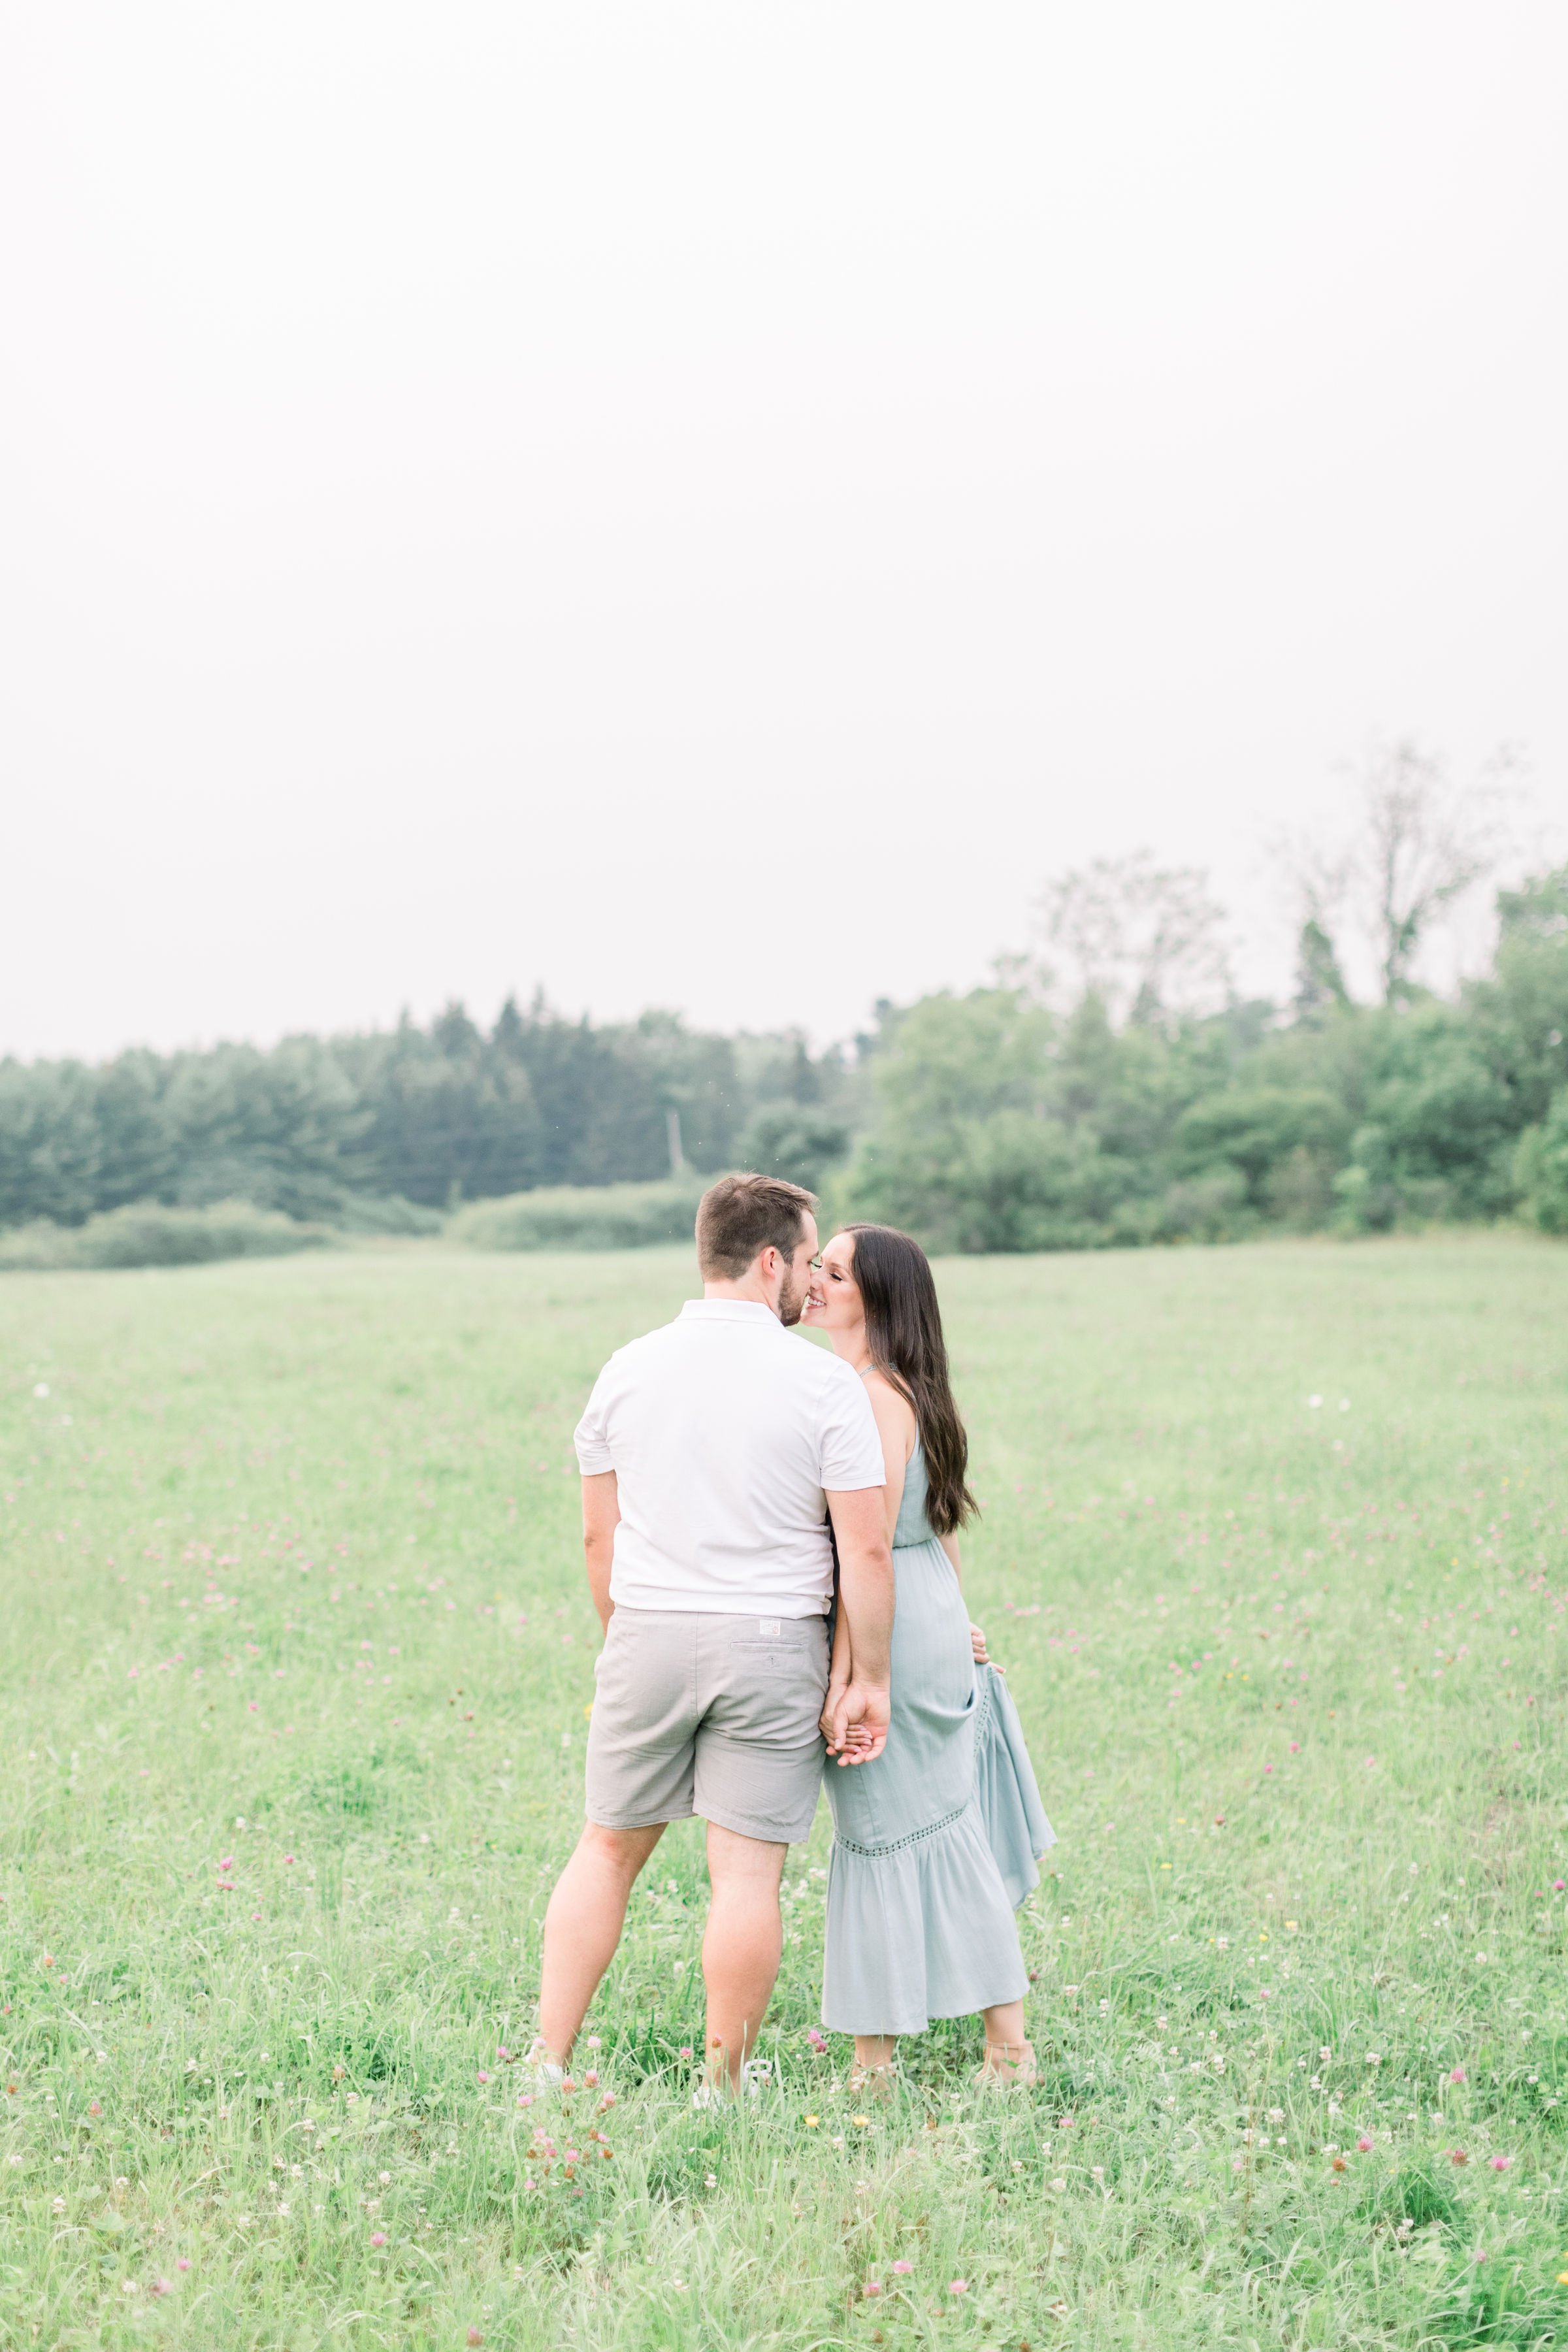  Chelsea Mason Photography captures a full-body portrait of partners kissing in Ontario. bright airy engagements Ontario #Kingstonengagement #GrassCreekParkPortraits #Ontarioengagementphotographers #Chelseamasonphotography #Chelseamasonengagements 